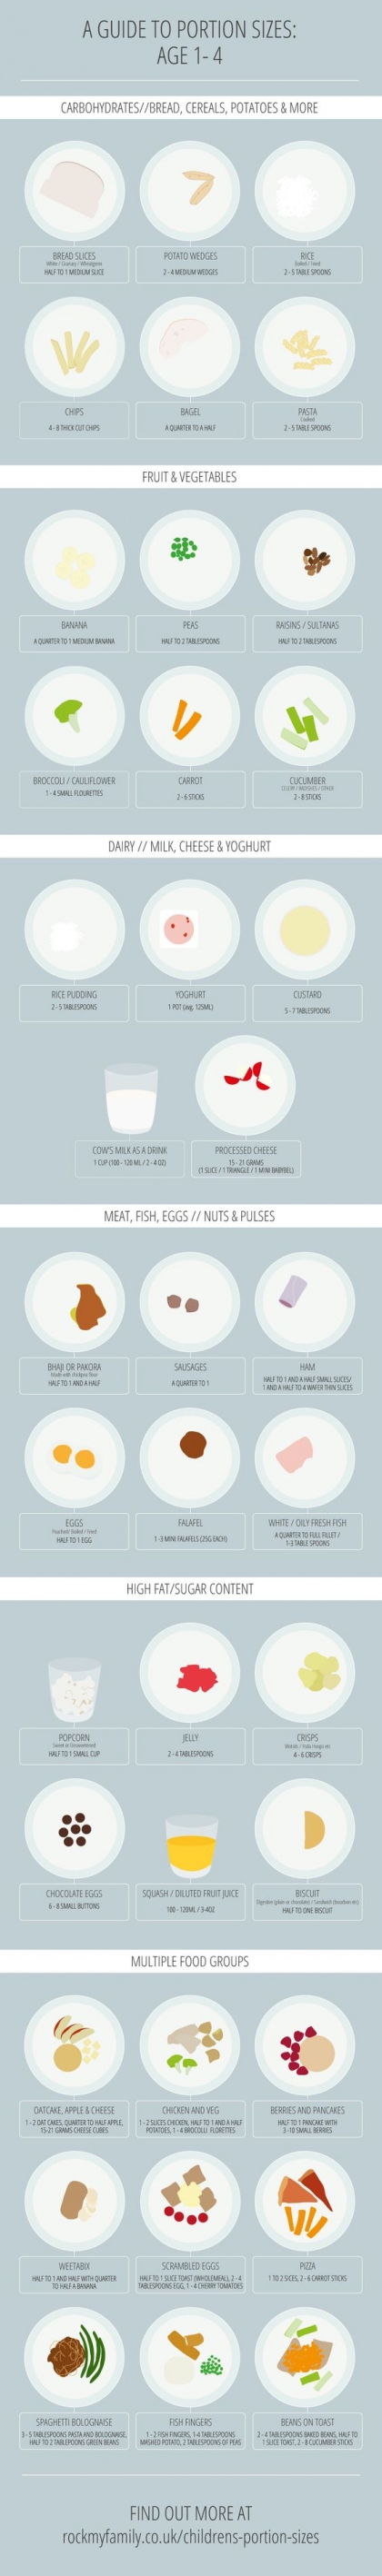 Portion Size Chart